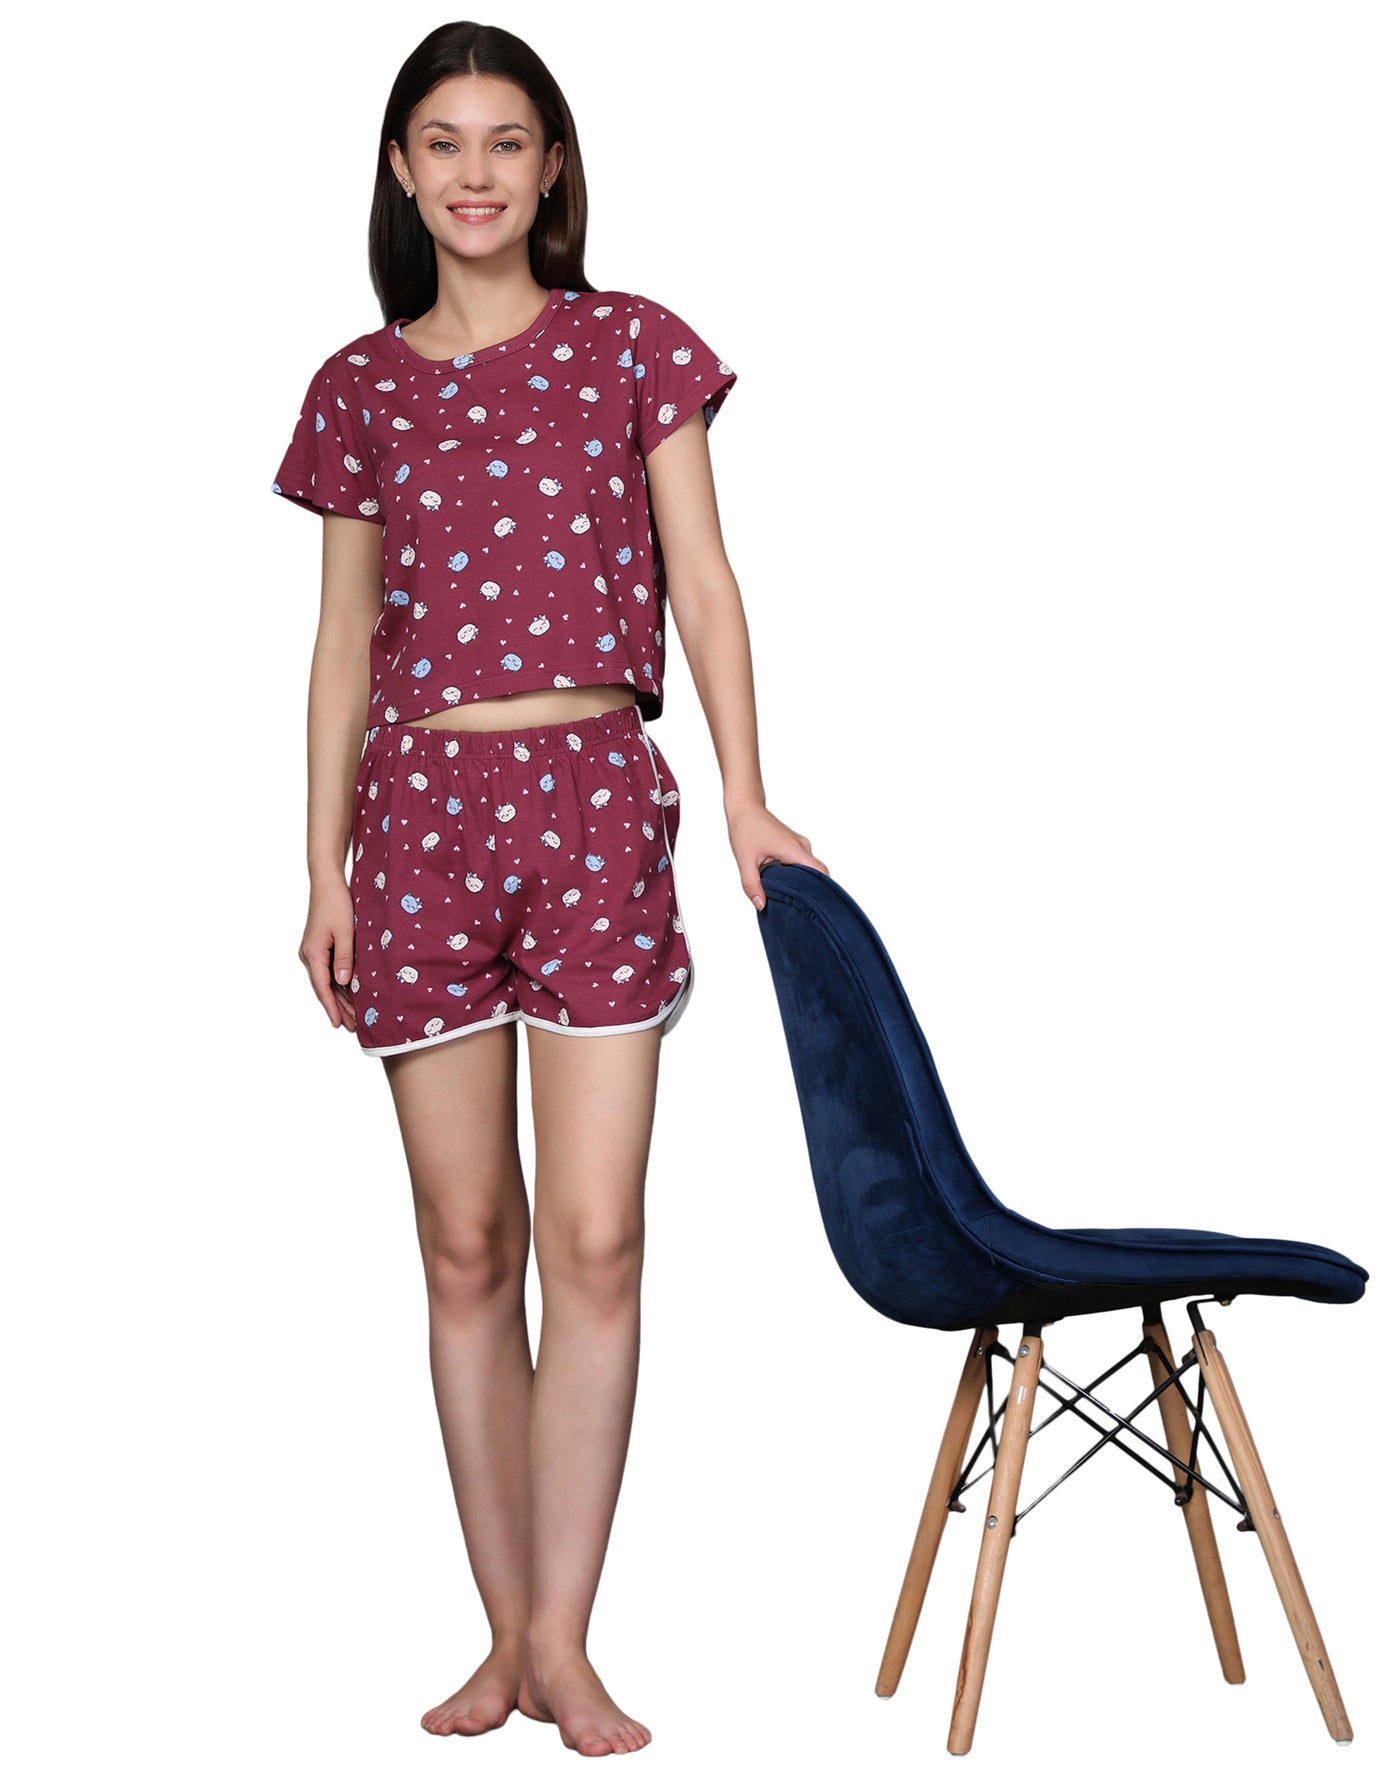 Night Suit Shorty Set for Women-Maroon Cat Print